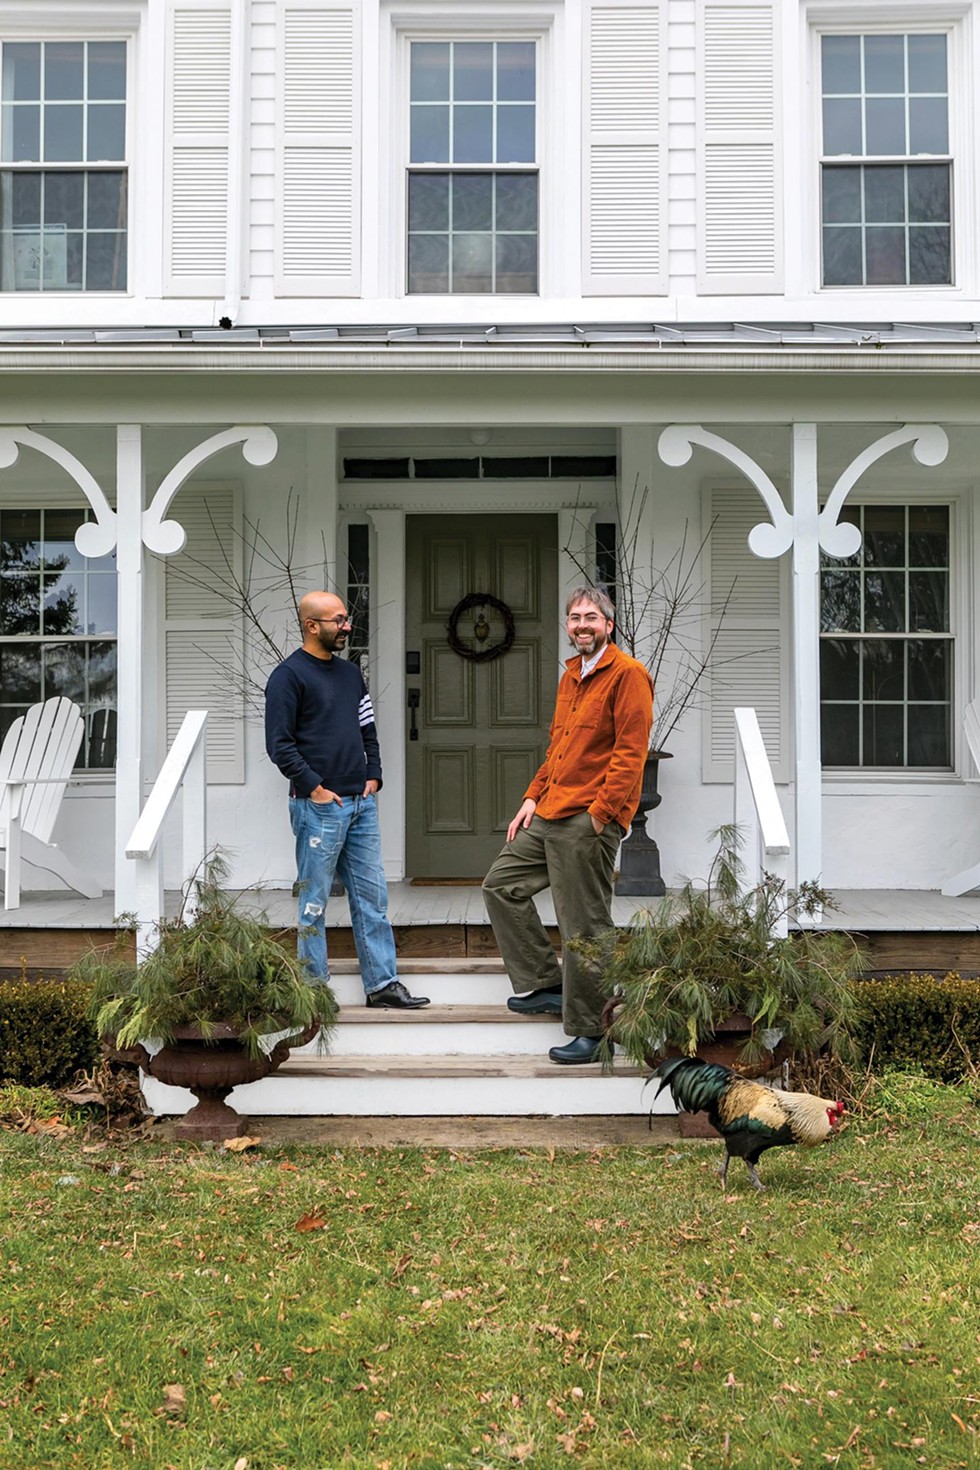 David Krause and Ayan Chatterjee on the front porch of their 1850 Colonial-style farmhouse in the Greene County hamlet of Freehold.